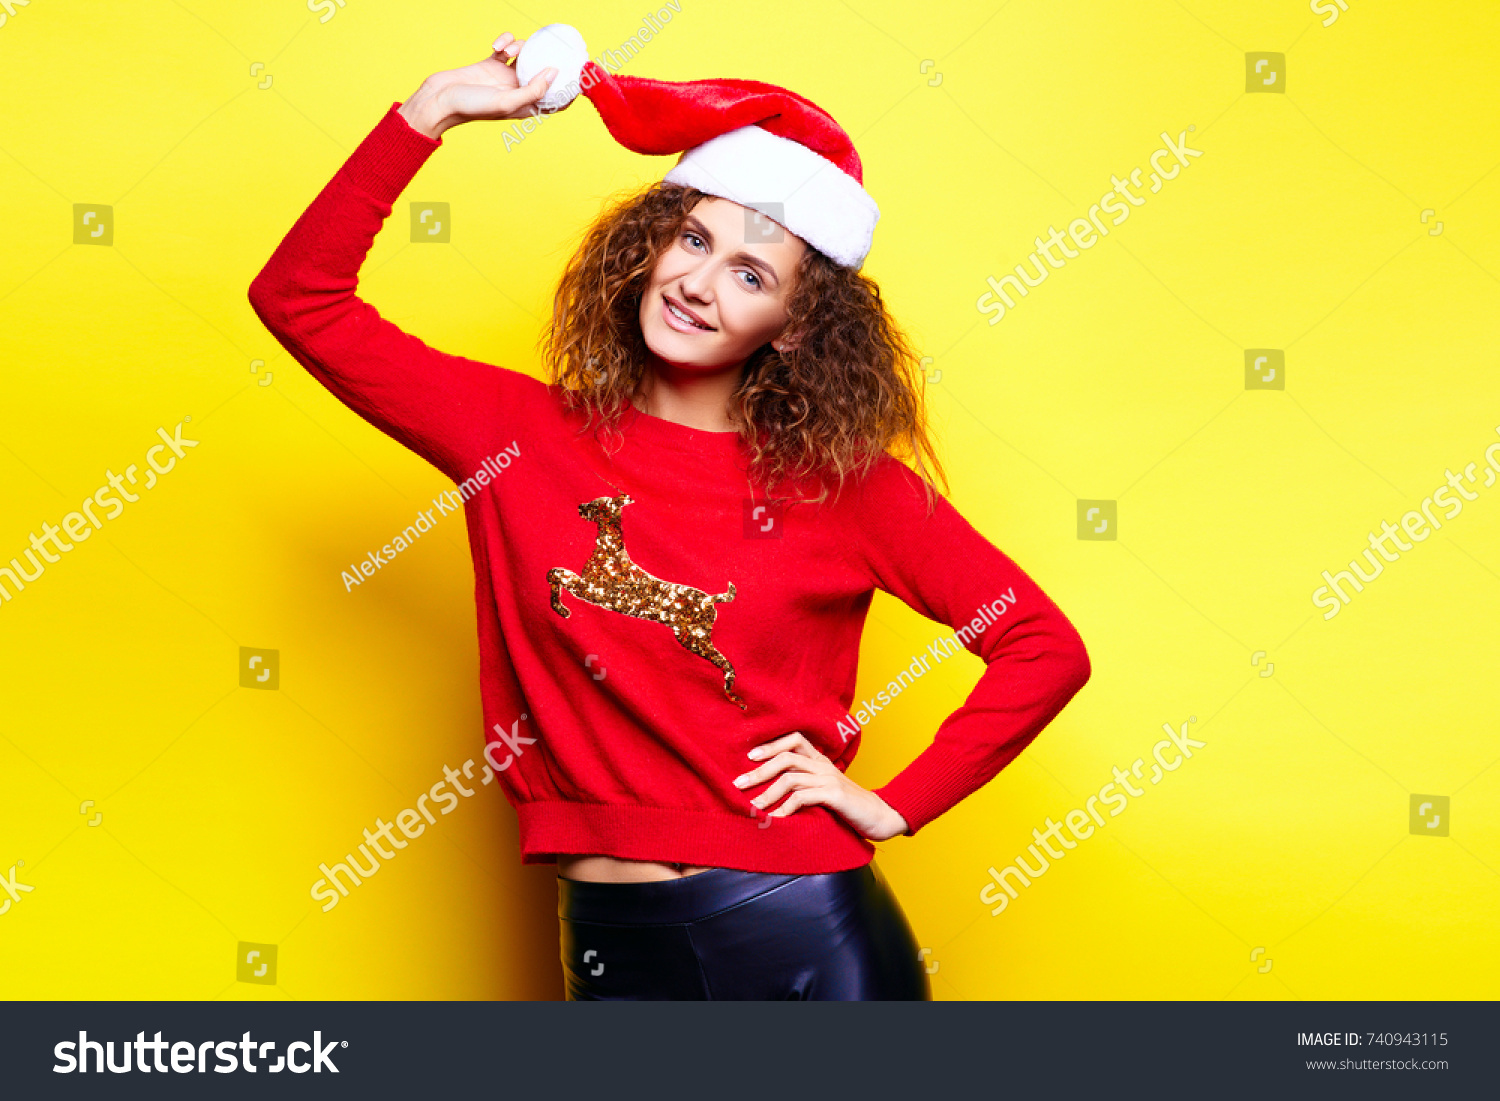 Santa woman in christmas hat wearing red sweater with deer smiling having fun laughing rejoices touches touches on yellow background in the studio. The concept of the holiday of Christmas and New Year #740943115